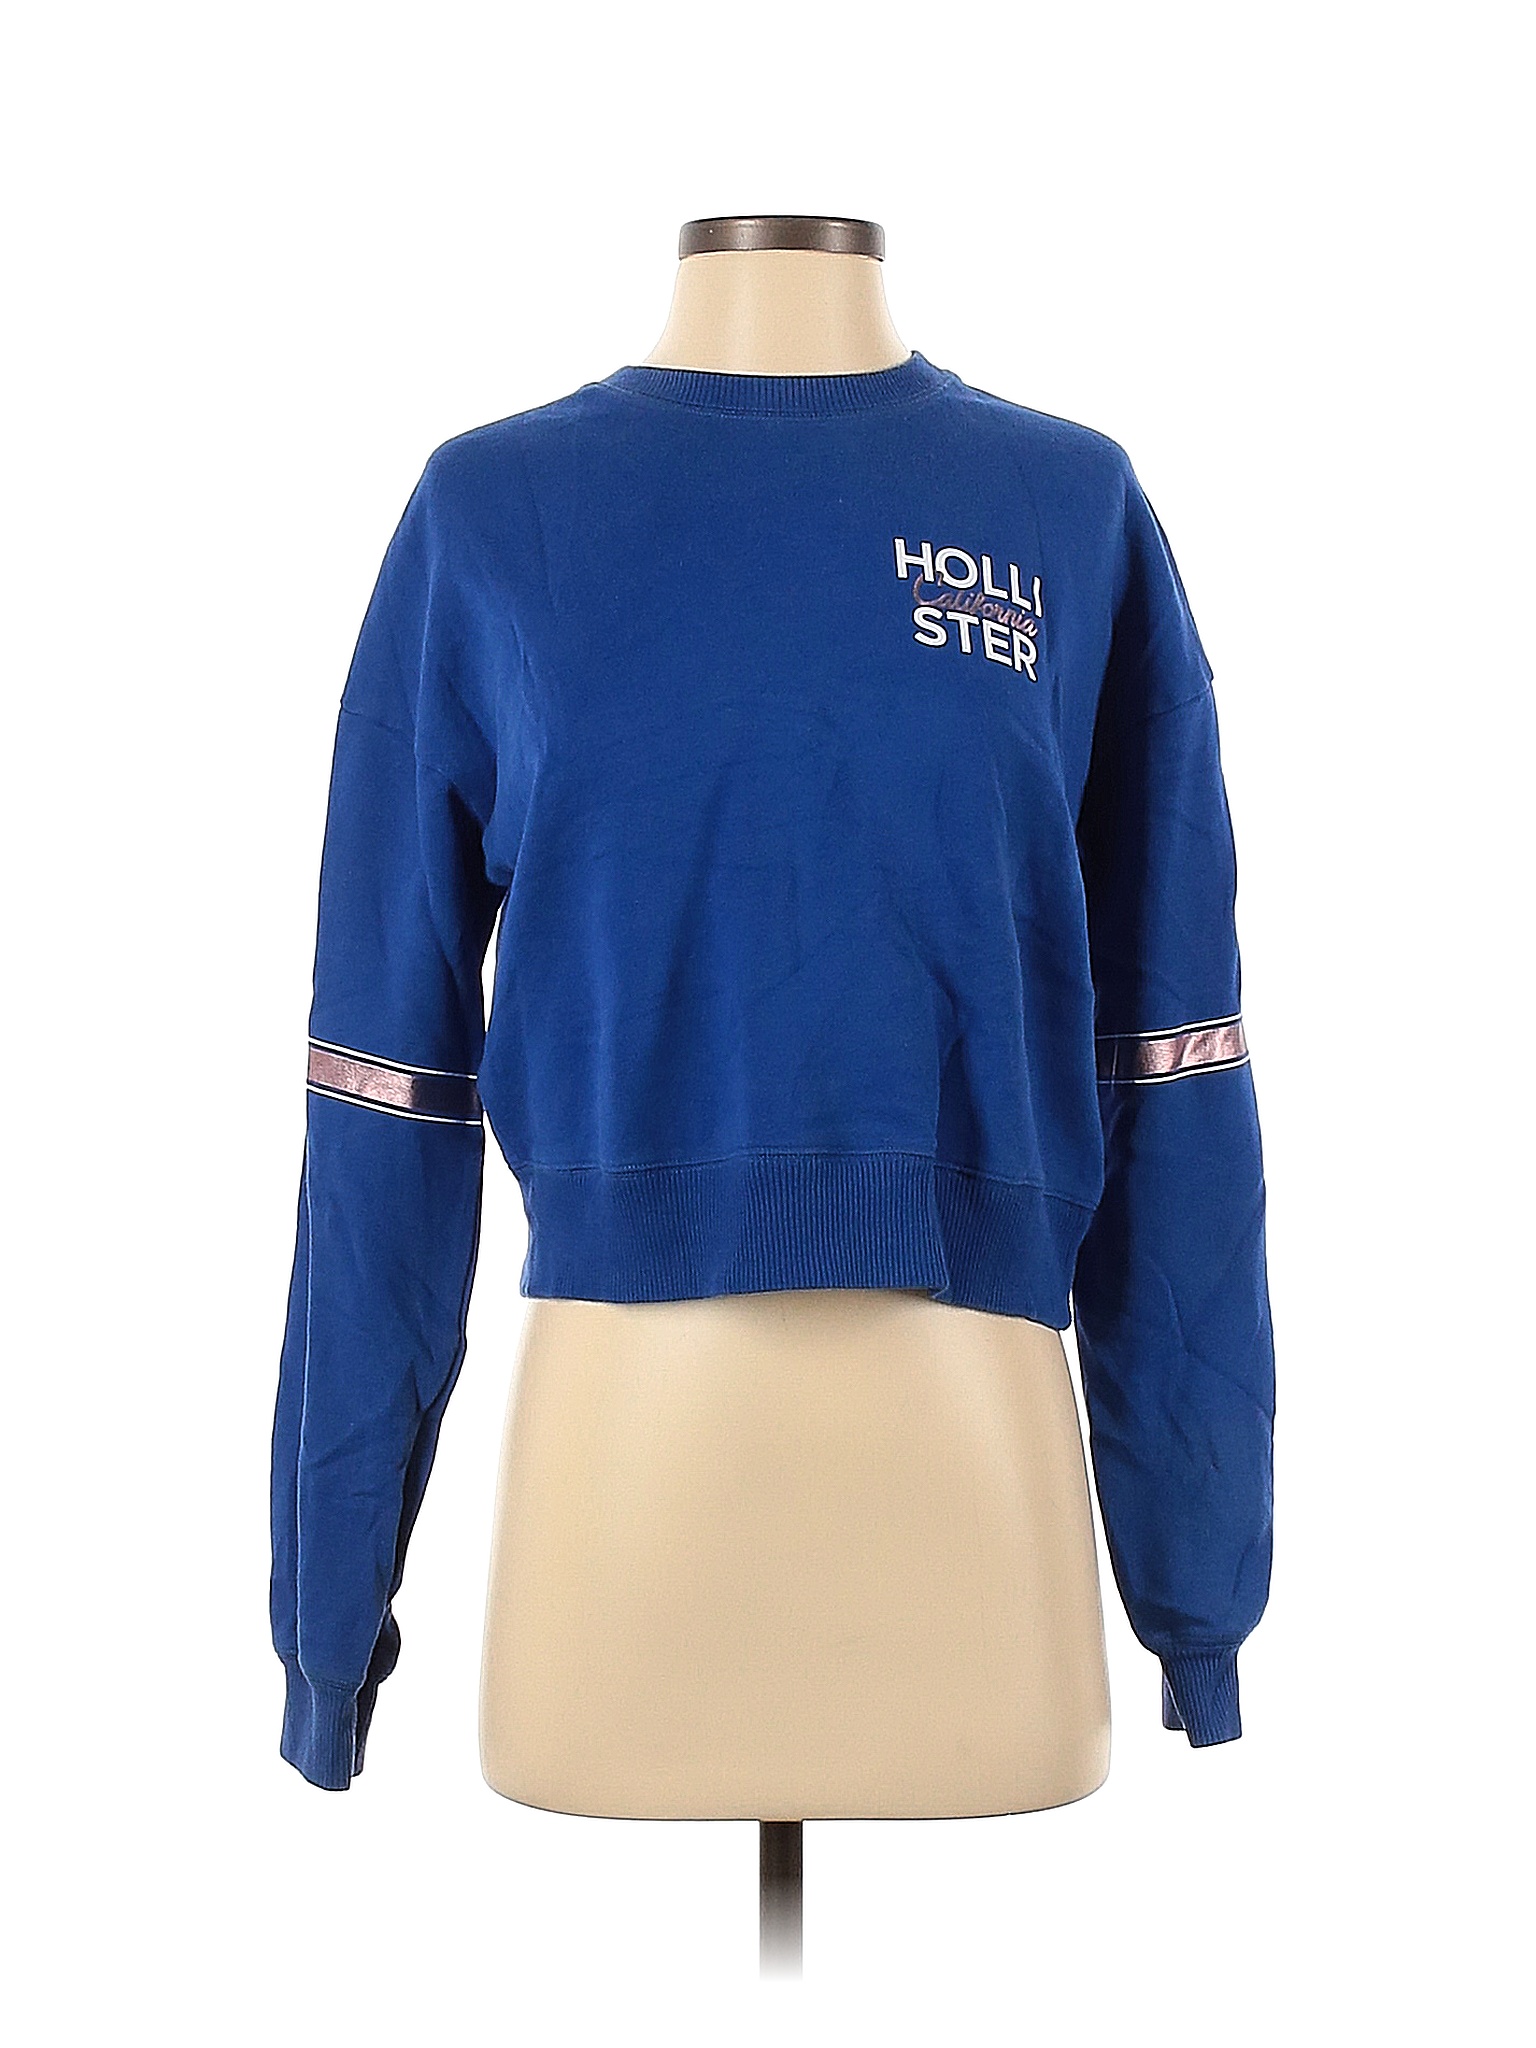 Hollister Graphic Solid Blue Sweatshirt Size S - 55% off